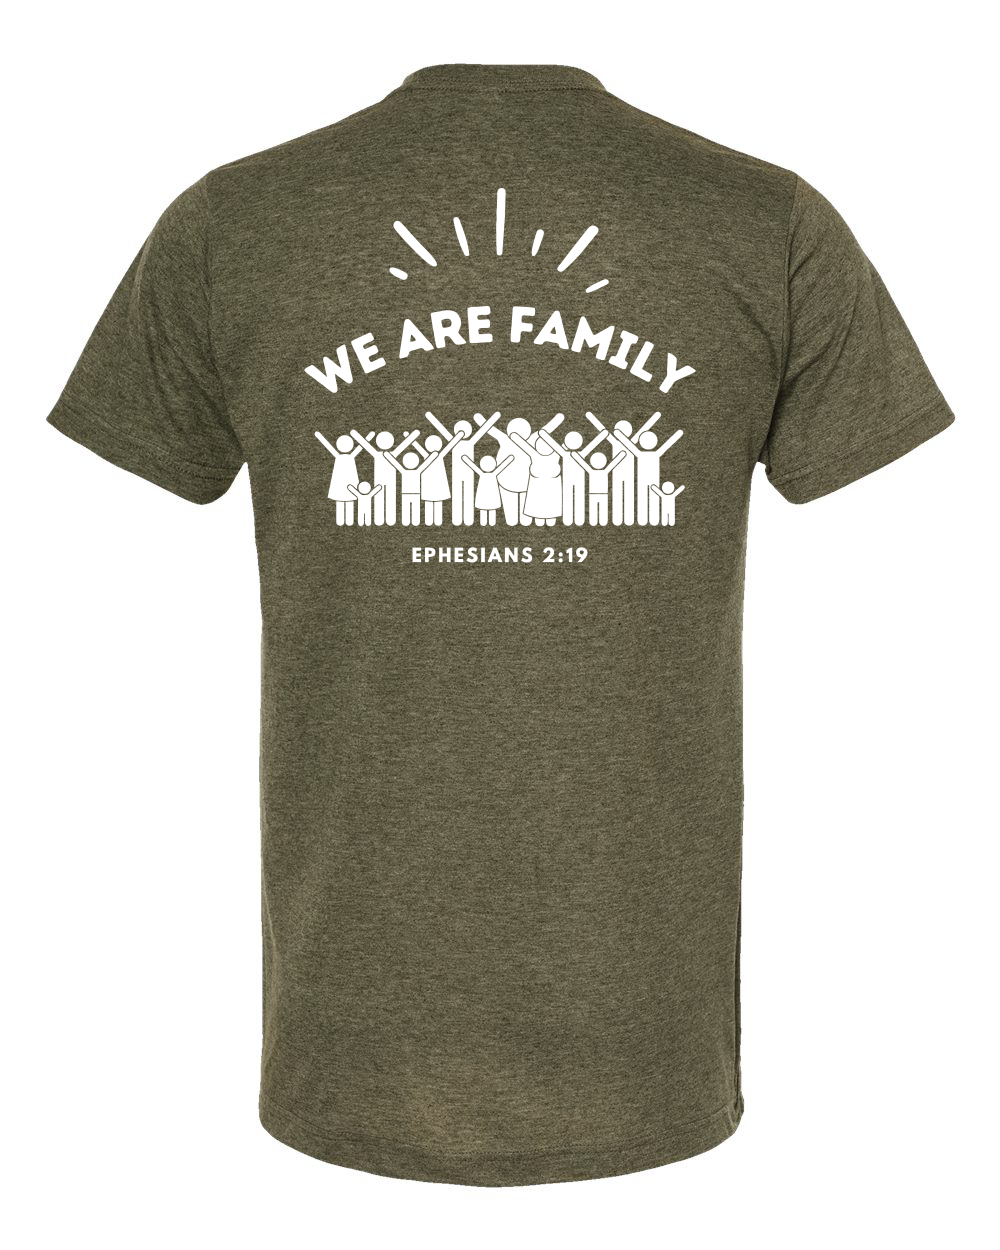 We are Family Youth T-Shirt